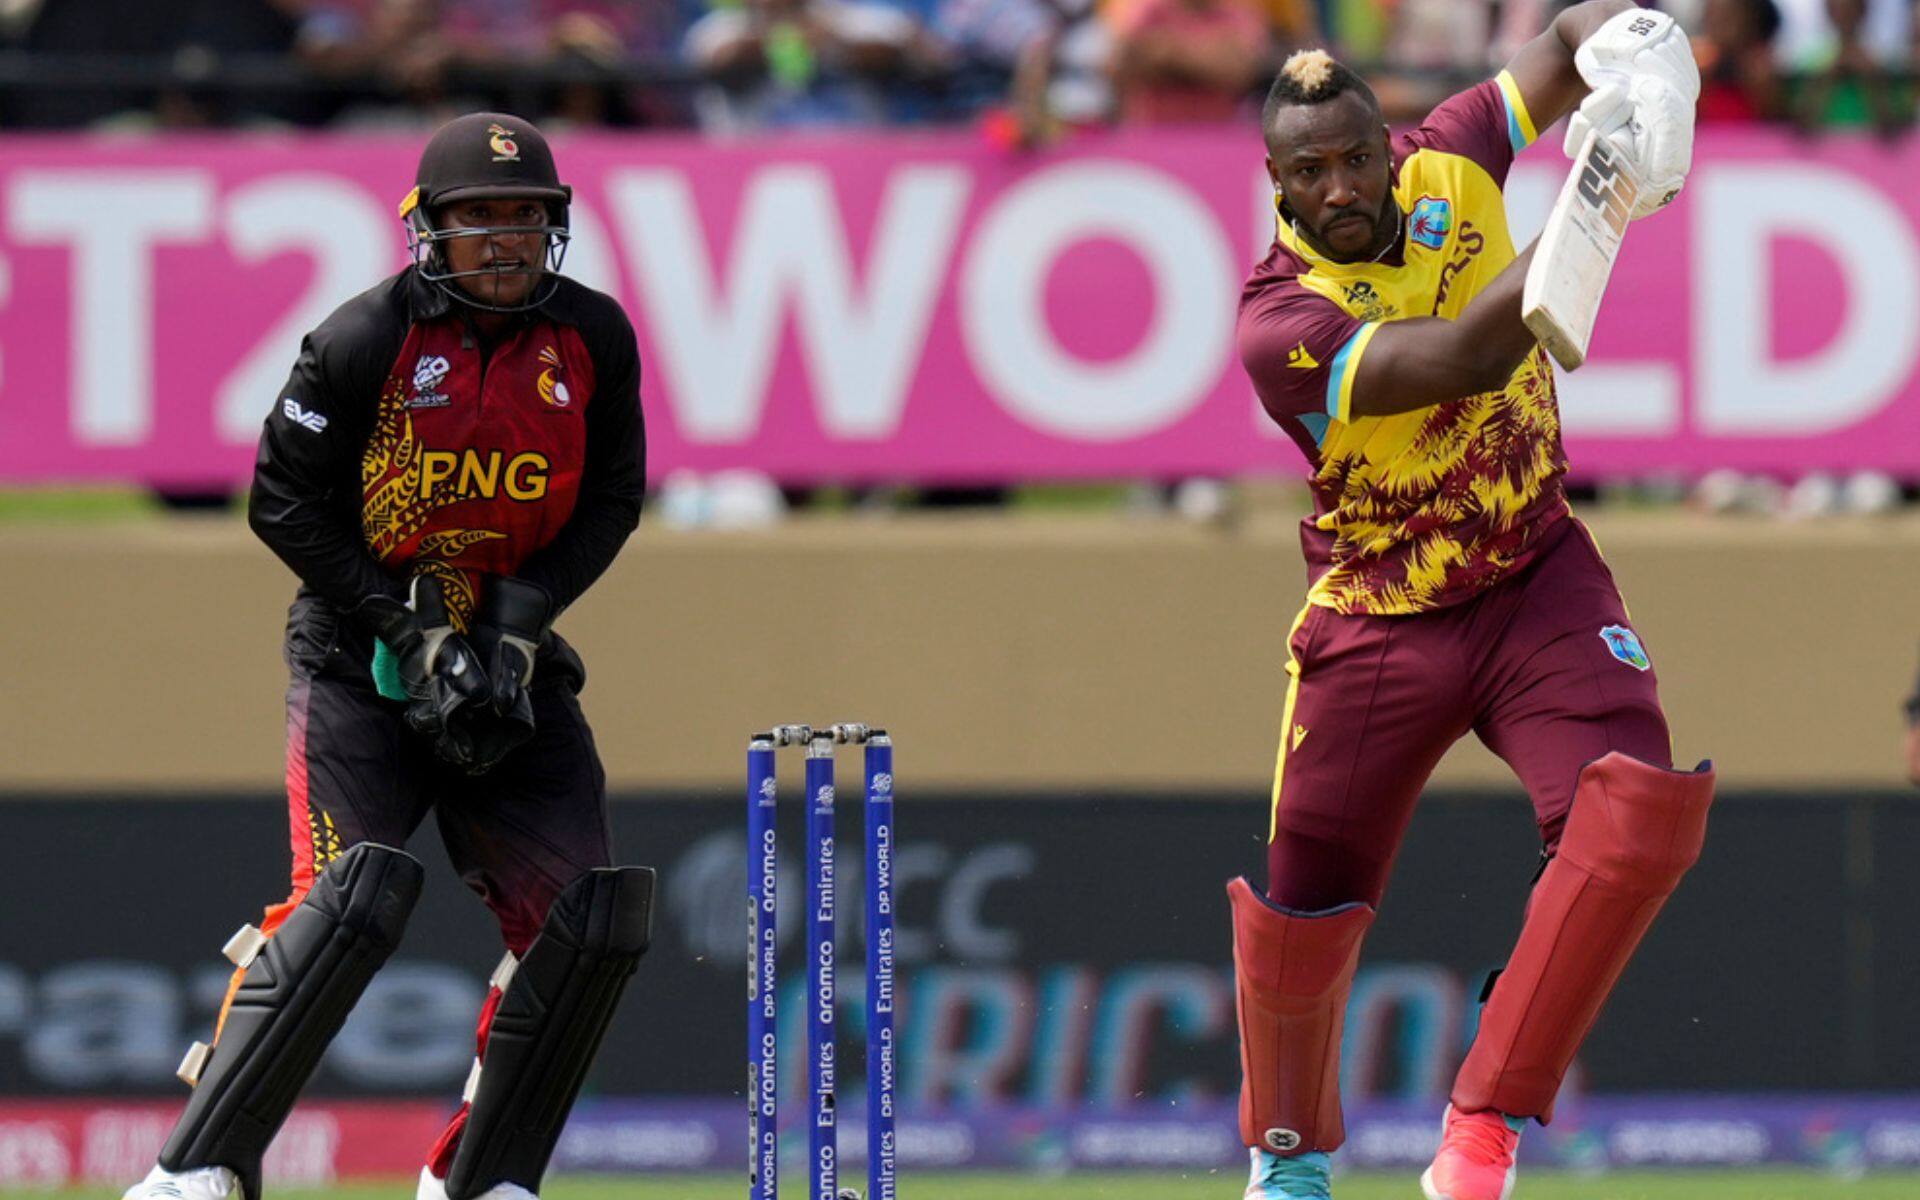 Andre Russell could be important for West Indies in the match [AP Photos]